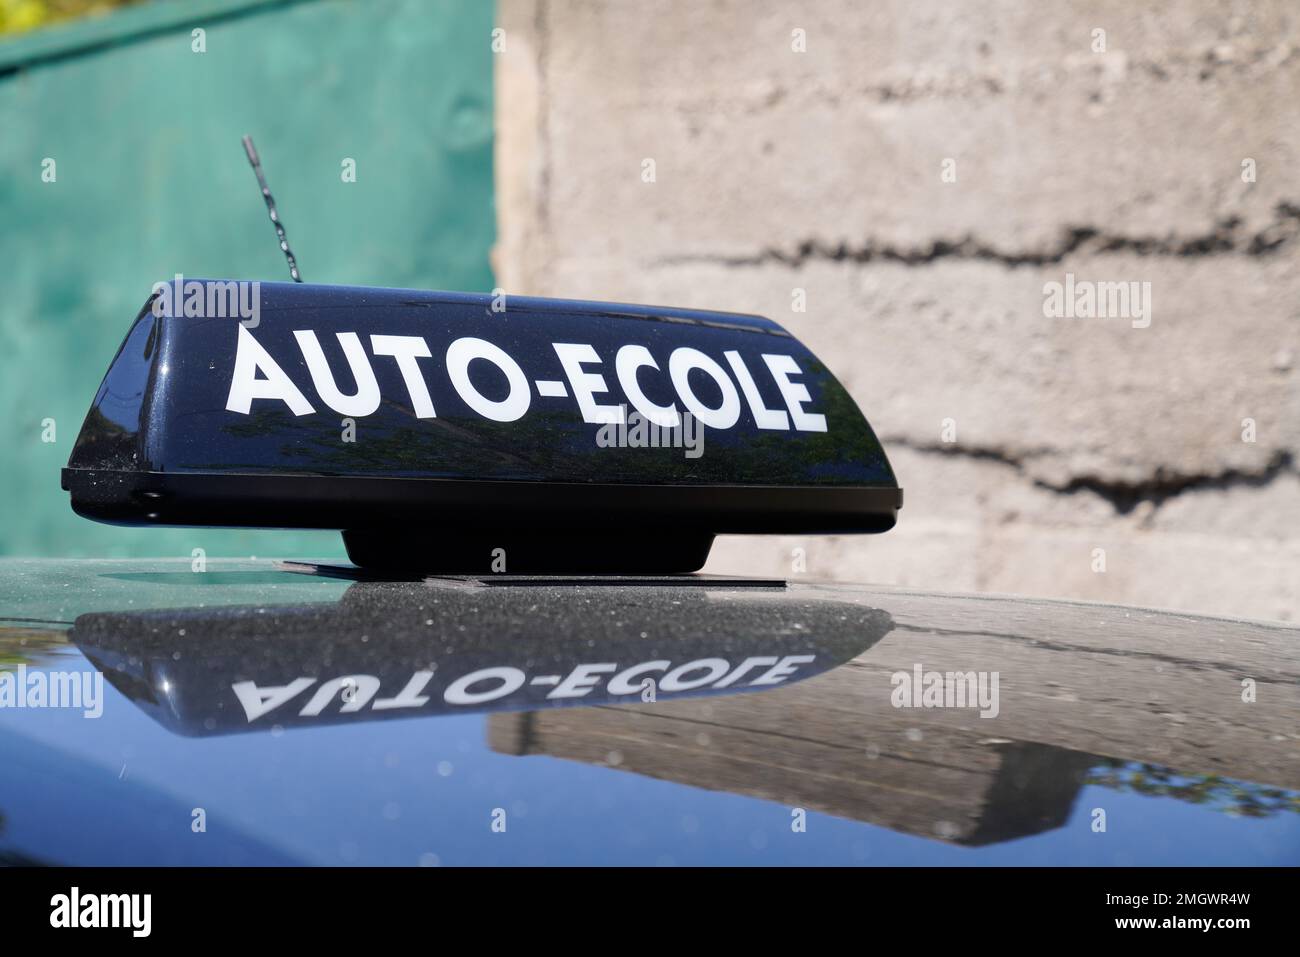 driving school means auto ecole text sign in french write on education learning car roof Stock Photo